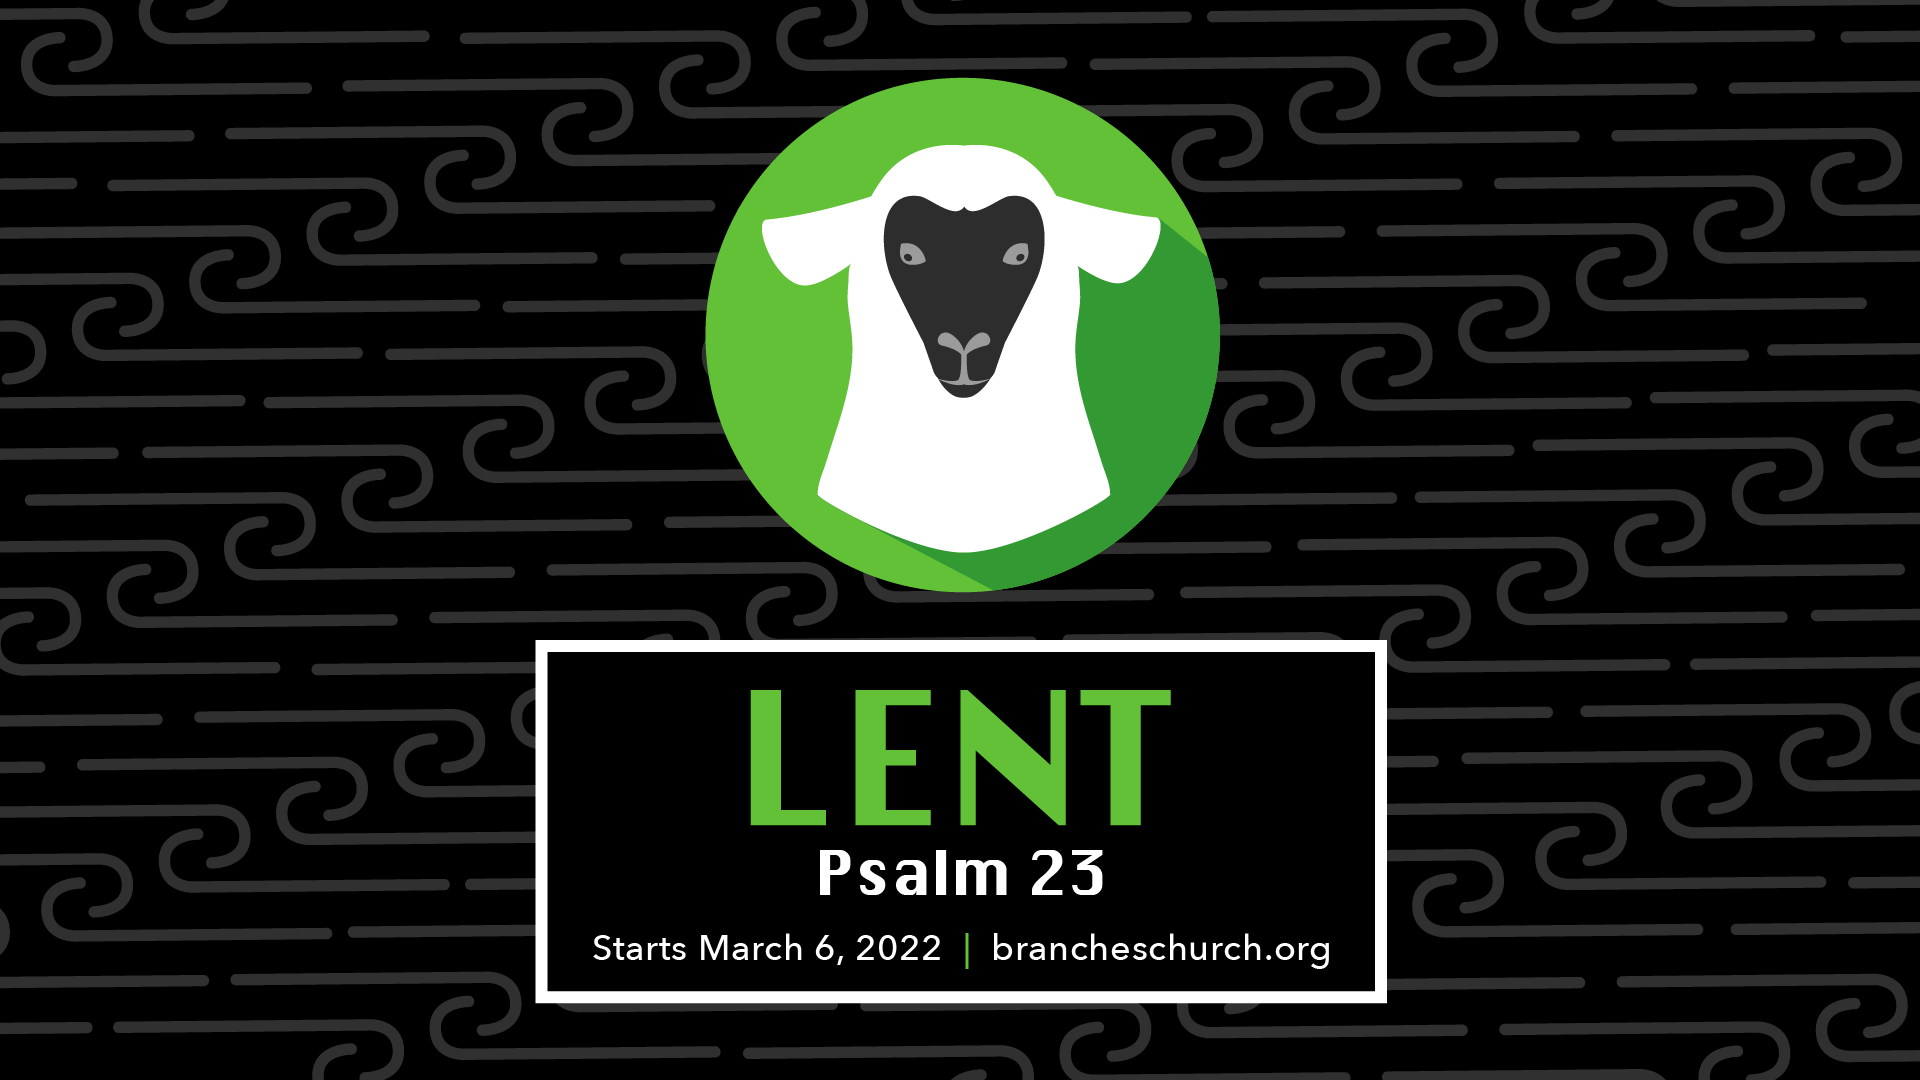 Lent Psalm 23 with sheep icon